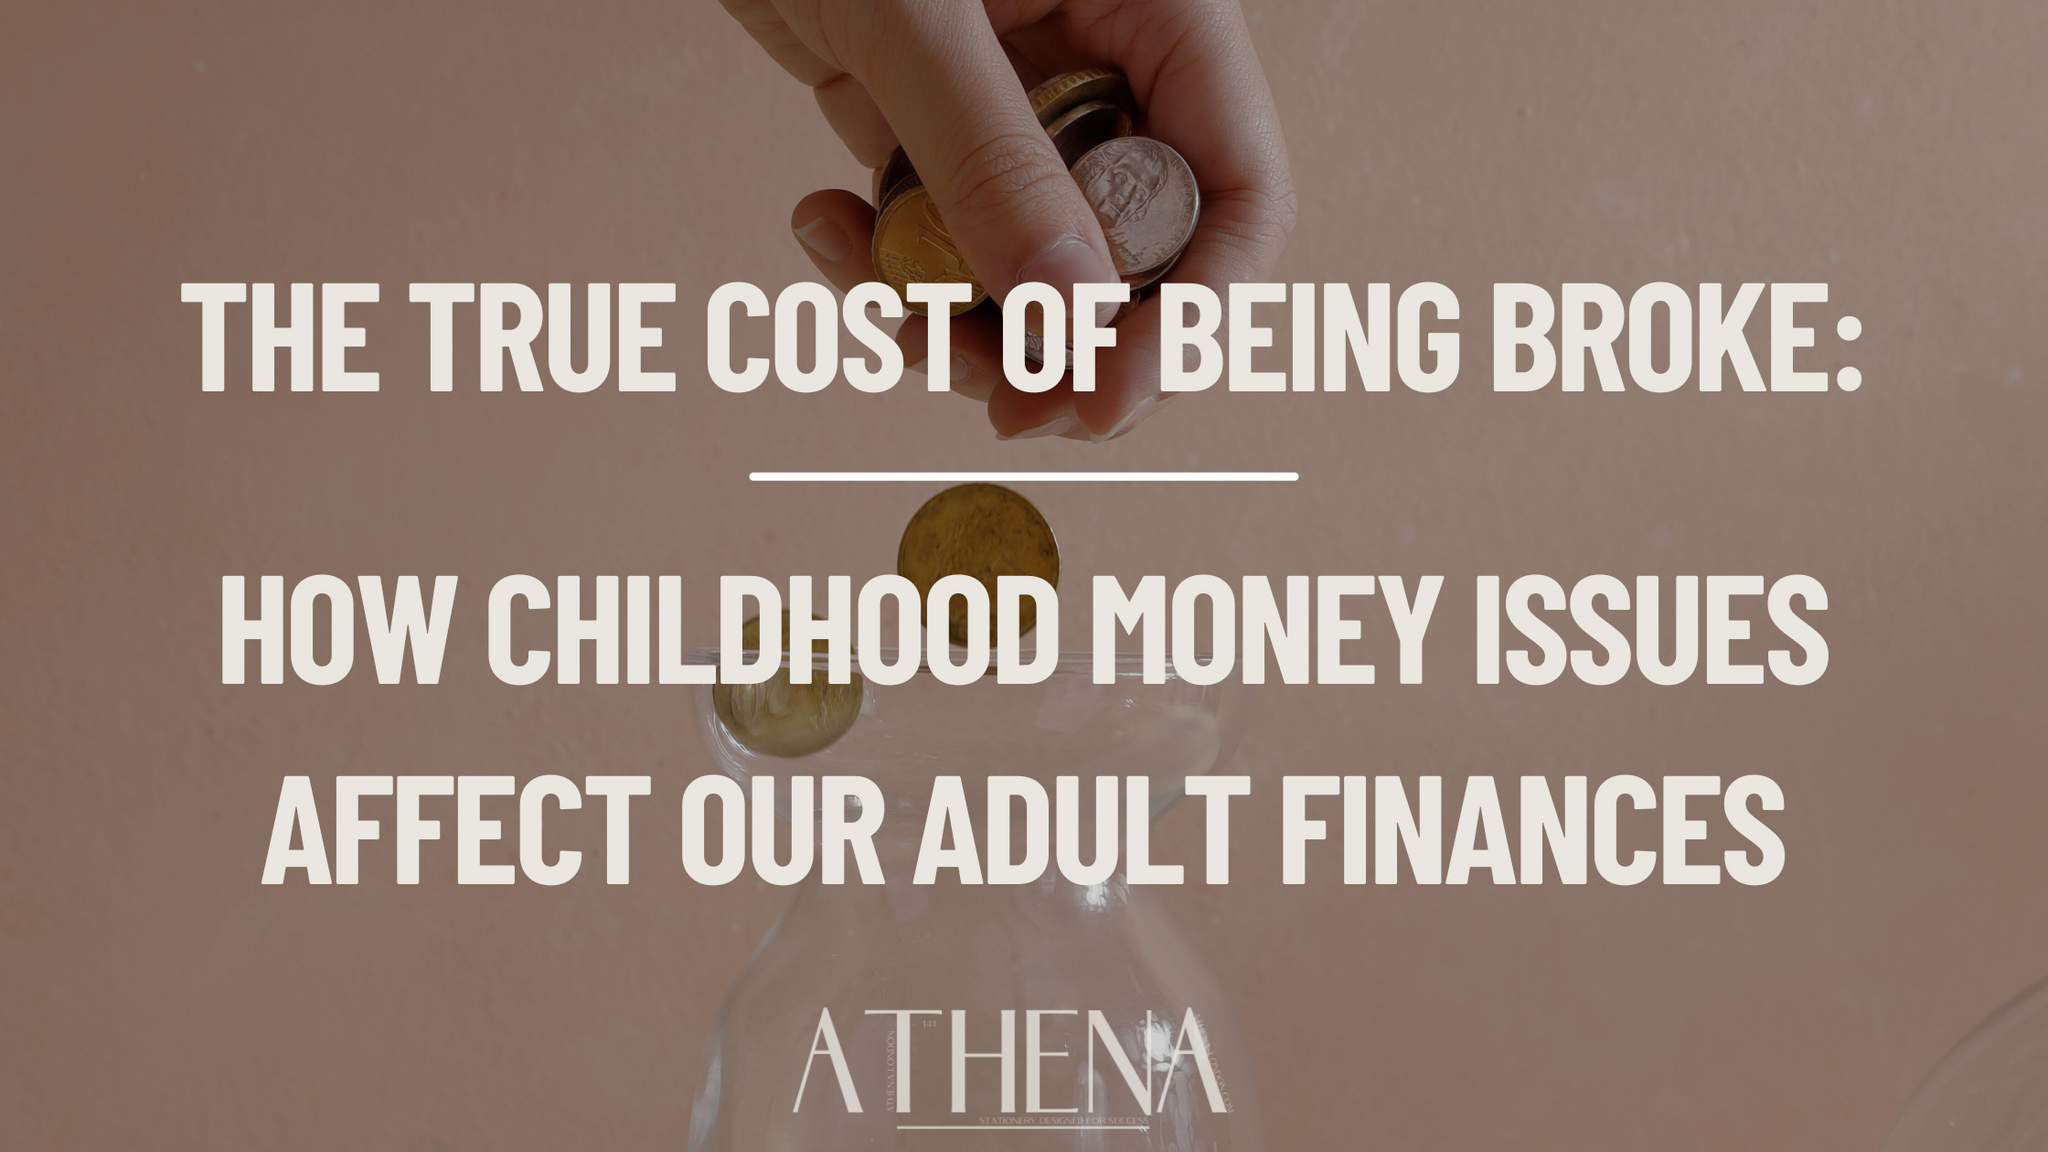 The True Cost of Being Broke: How Childhood Money Issues Affect Our Adult Finances